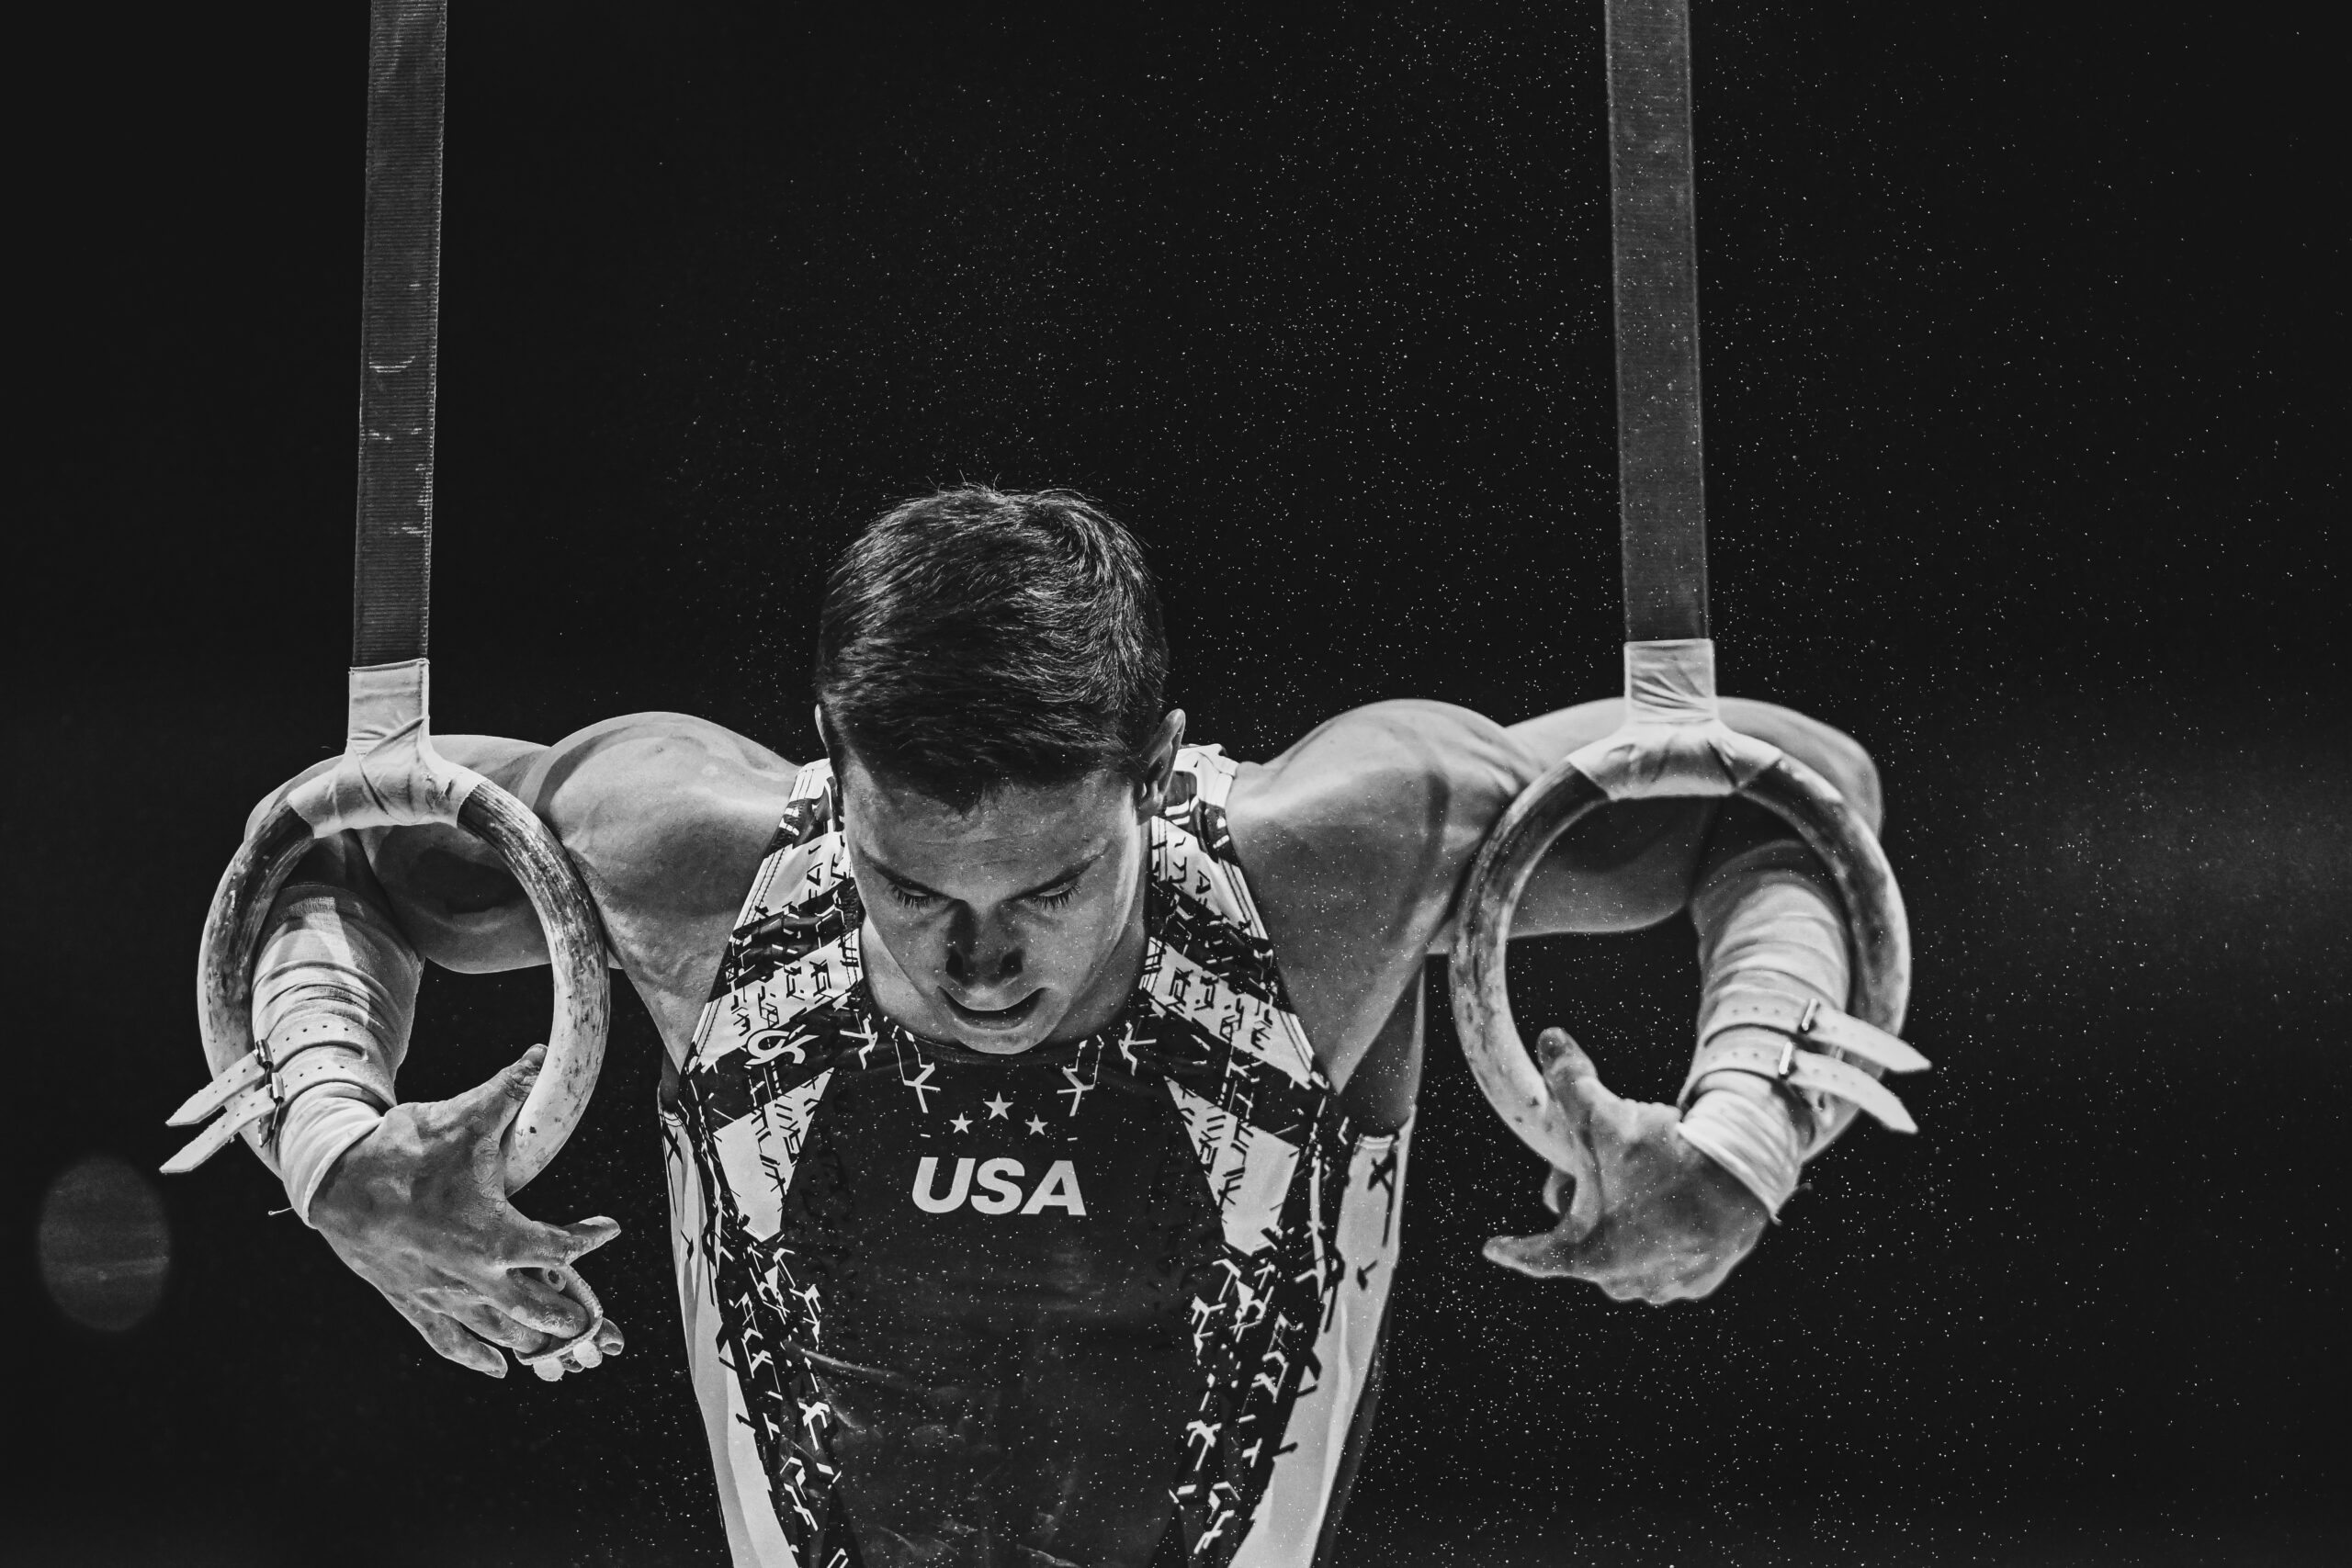 Team USA's Brody Malone on rings at the 2022 World Gymnastics Championships.